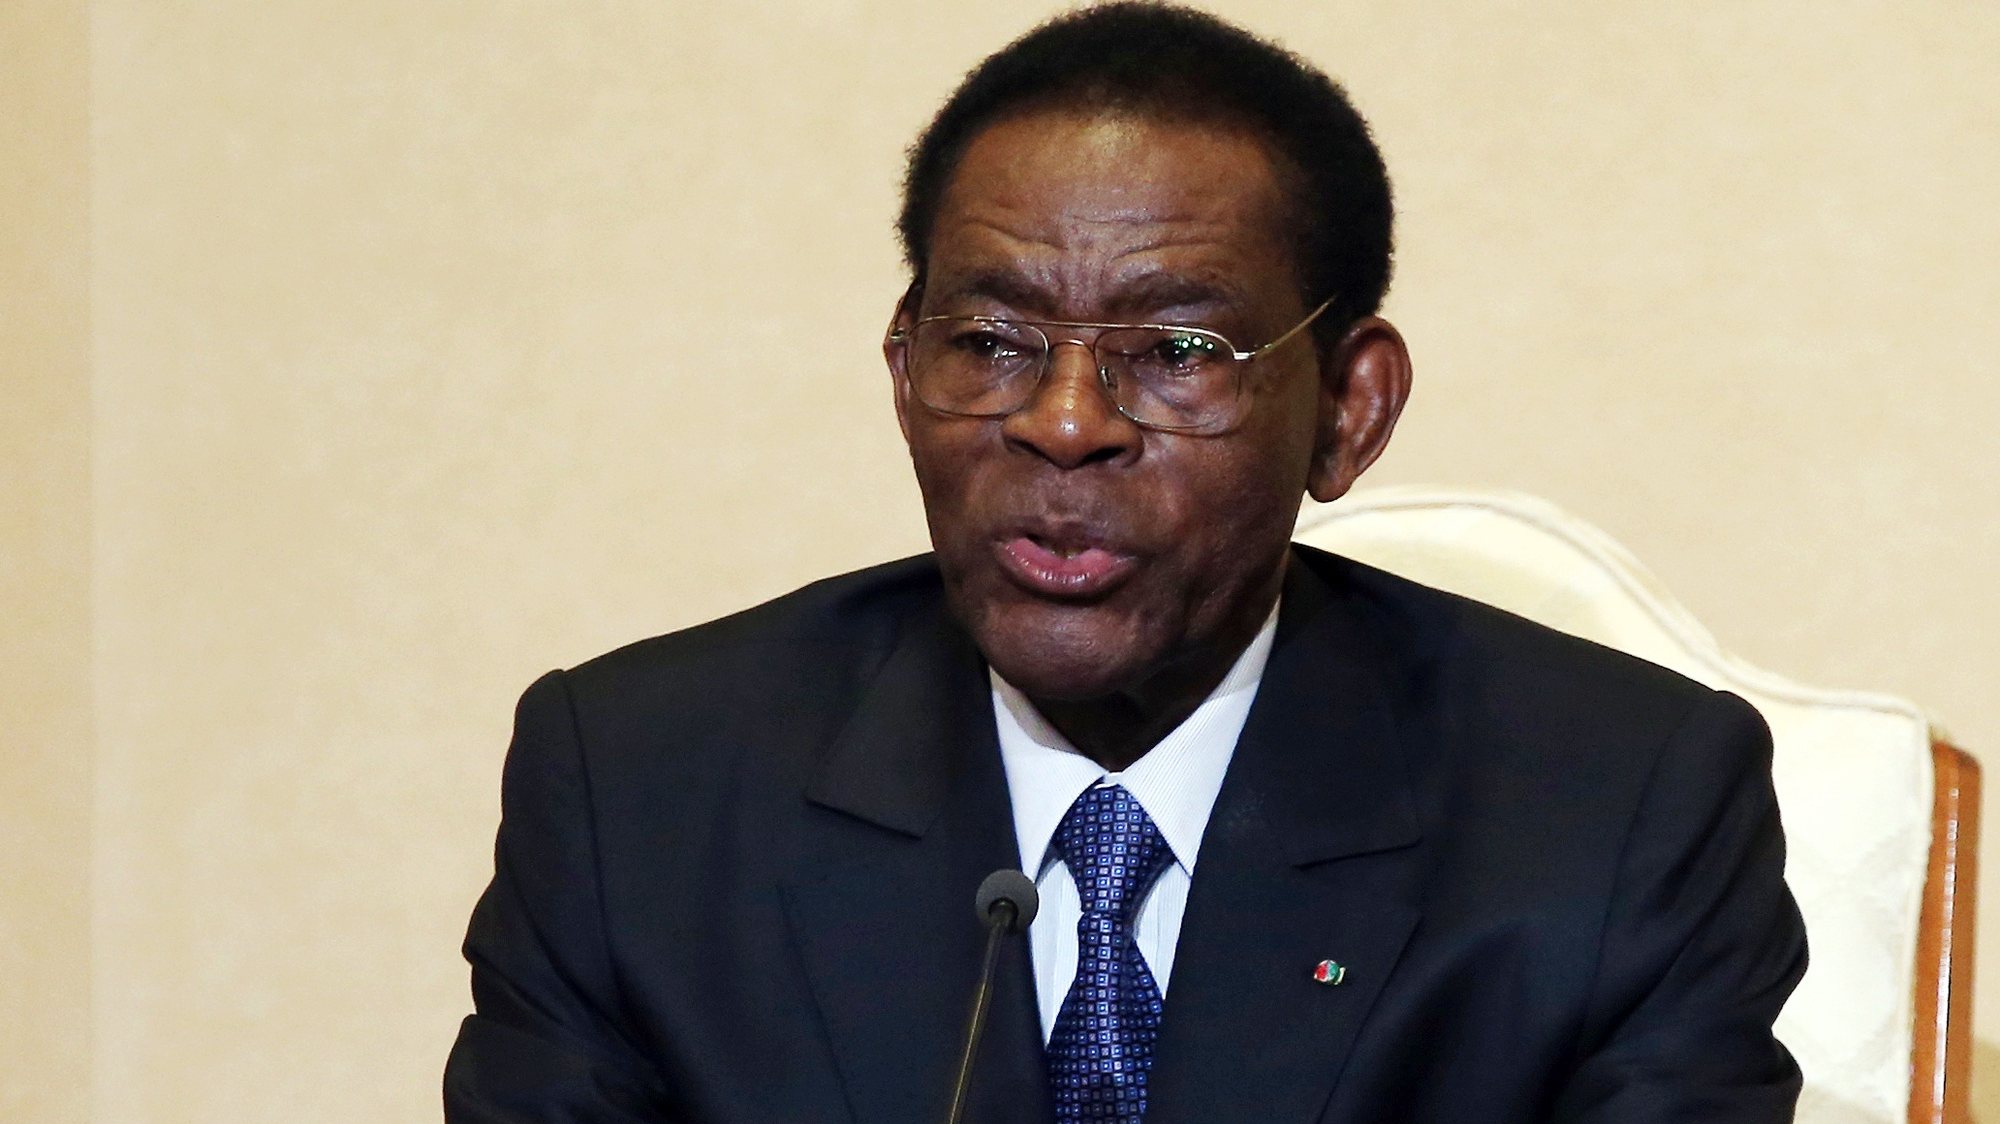 epa09061236 (FILE) - President of Equatorial Guinea Teodoro Obiang Nguema Mbasogo gives a press conference at the Carthage Presidential Palace in Tunis, Tunisia,  27 February 2018 (reissued 08 March 2021). Equatorial Guinea&#039;s main city Bata has been rocked by several explosions on 07 March, President Teodoro Obiang Nguema Mbasogo said in an official statement, blaming negligence and carelessness of a unit in charge of explosives at a military base.  EPA/MOHAMED MESSARA